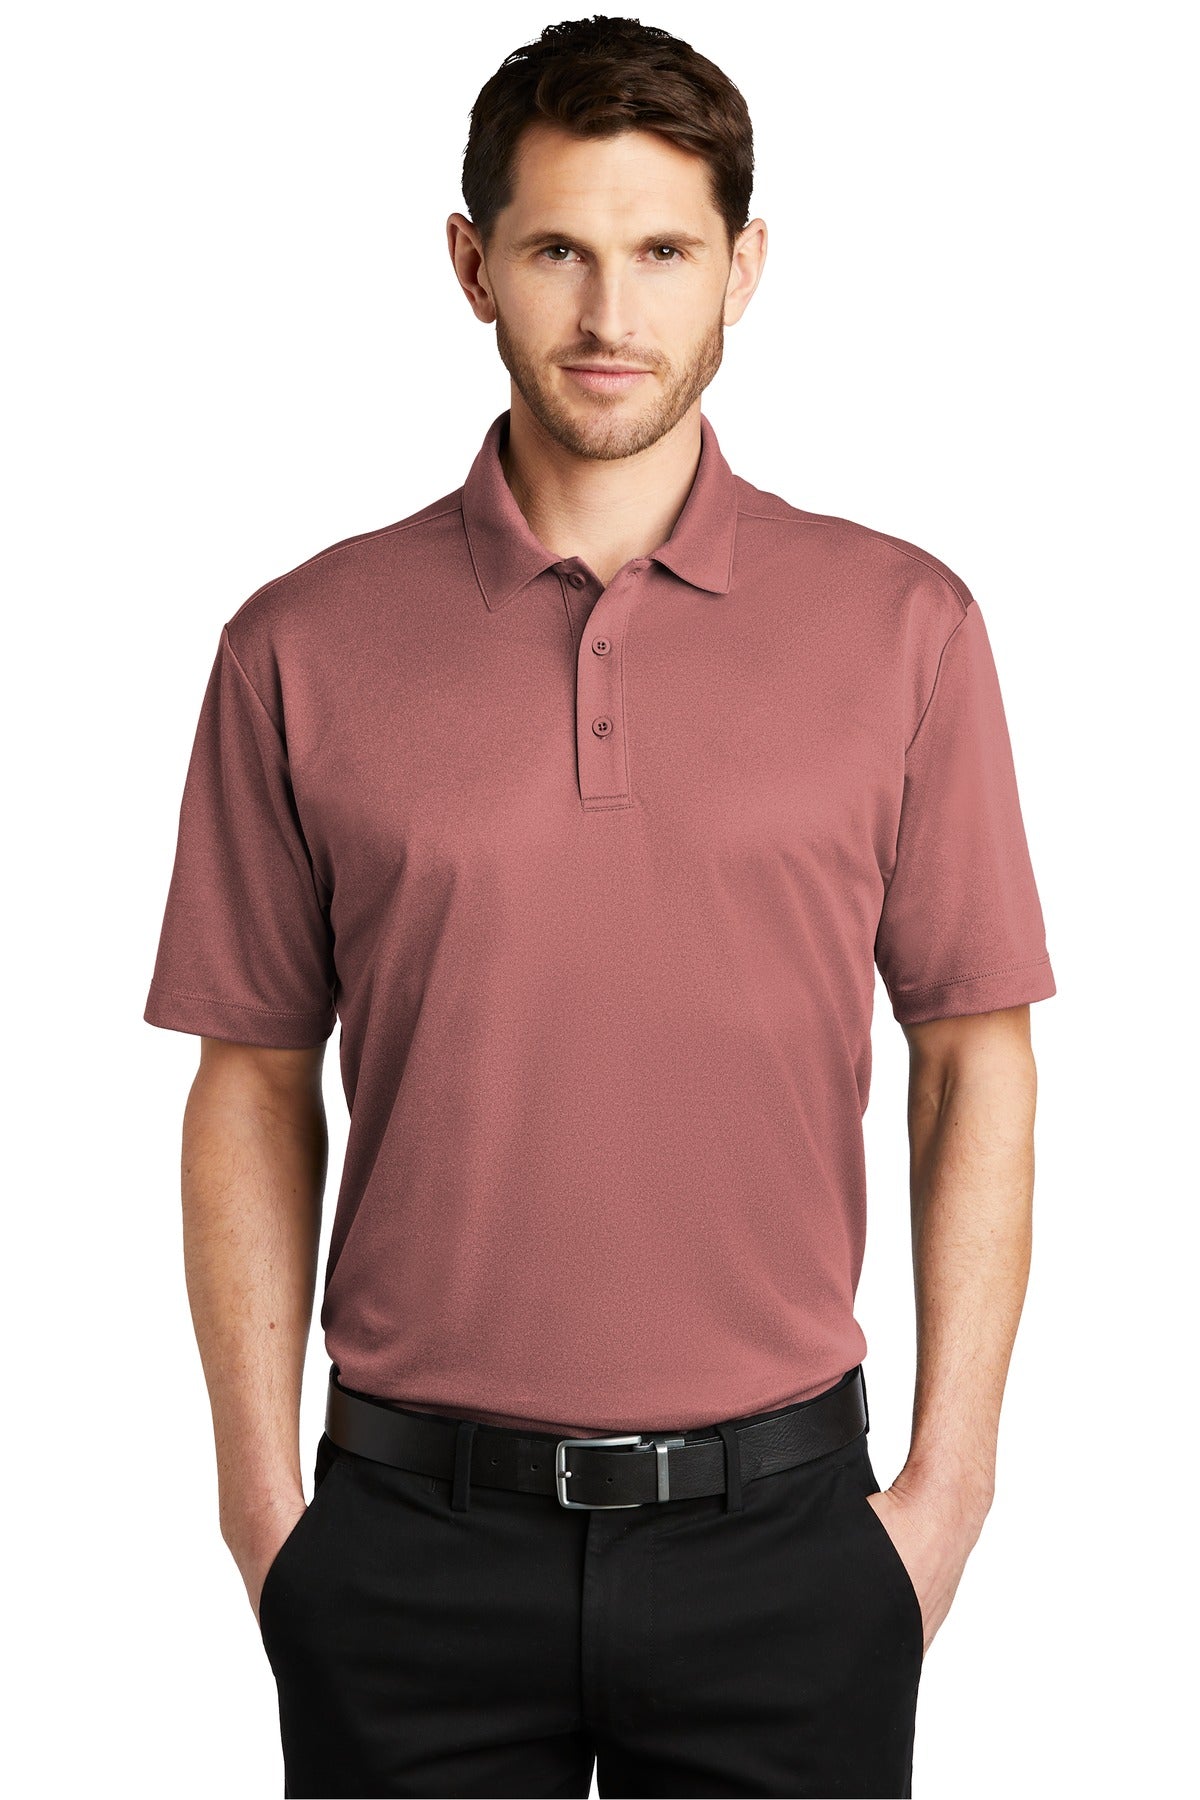 Port Authority ® Heathered Silk Touch ™ Performance Polo. K542